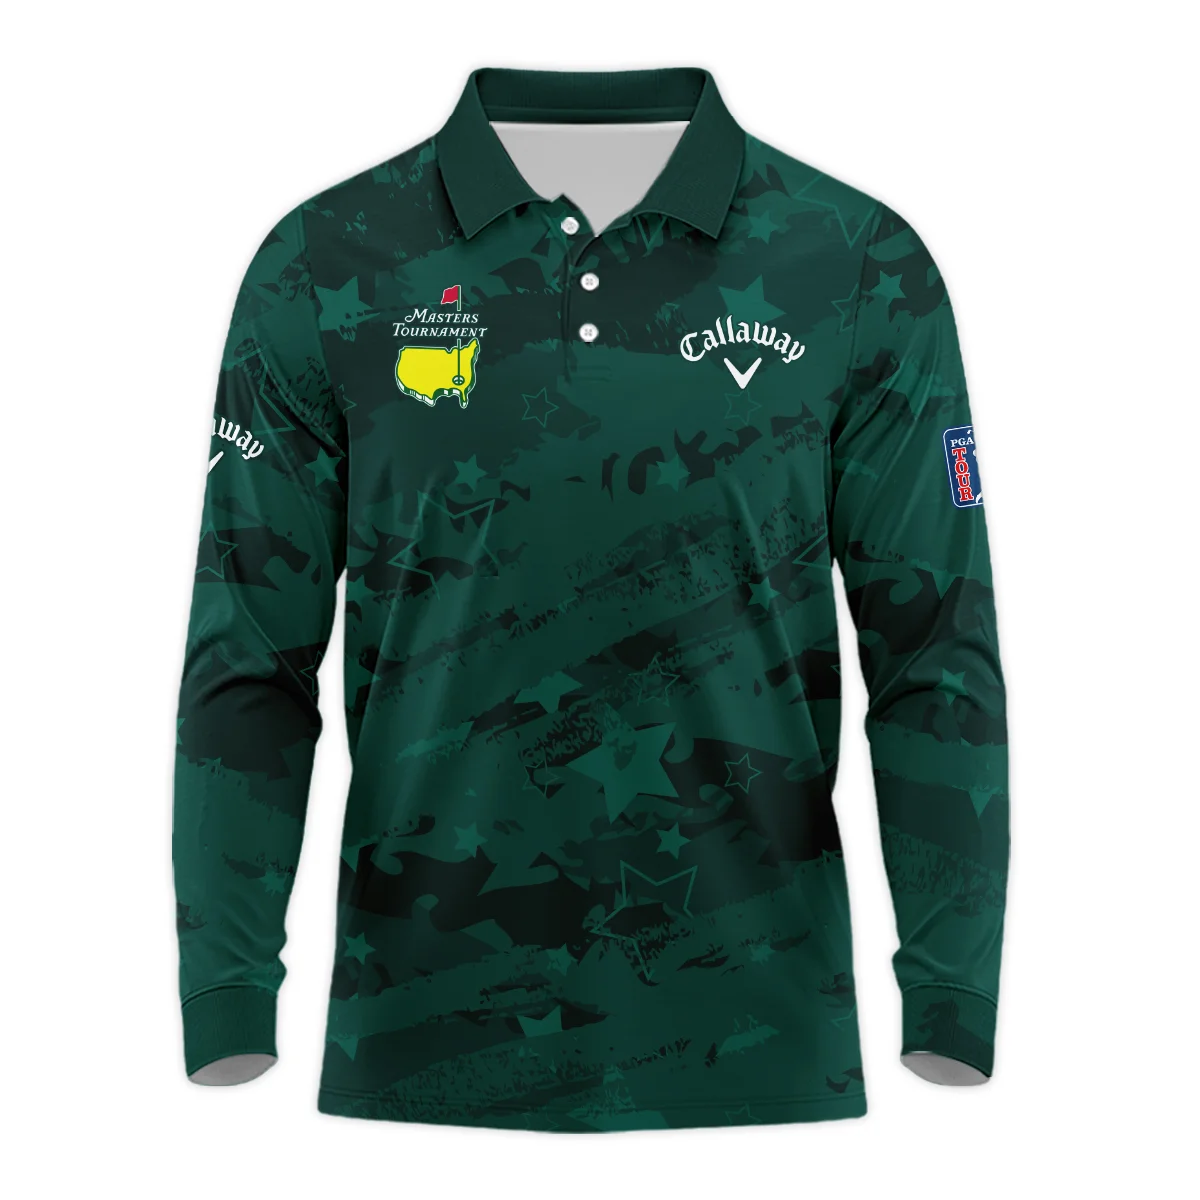 Dark Green Stars Pattern Grunge Background Masters Tournament Callaway Vneck Long Polo Shirt Style Classic Long Polo Shirt For Men